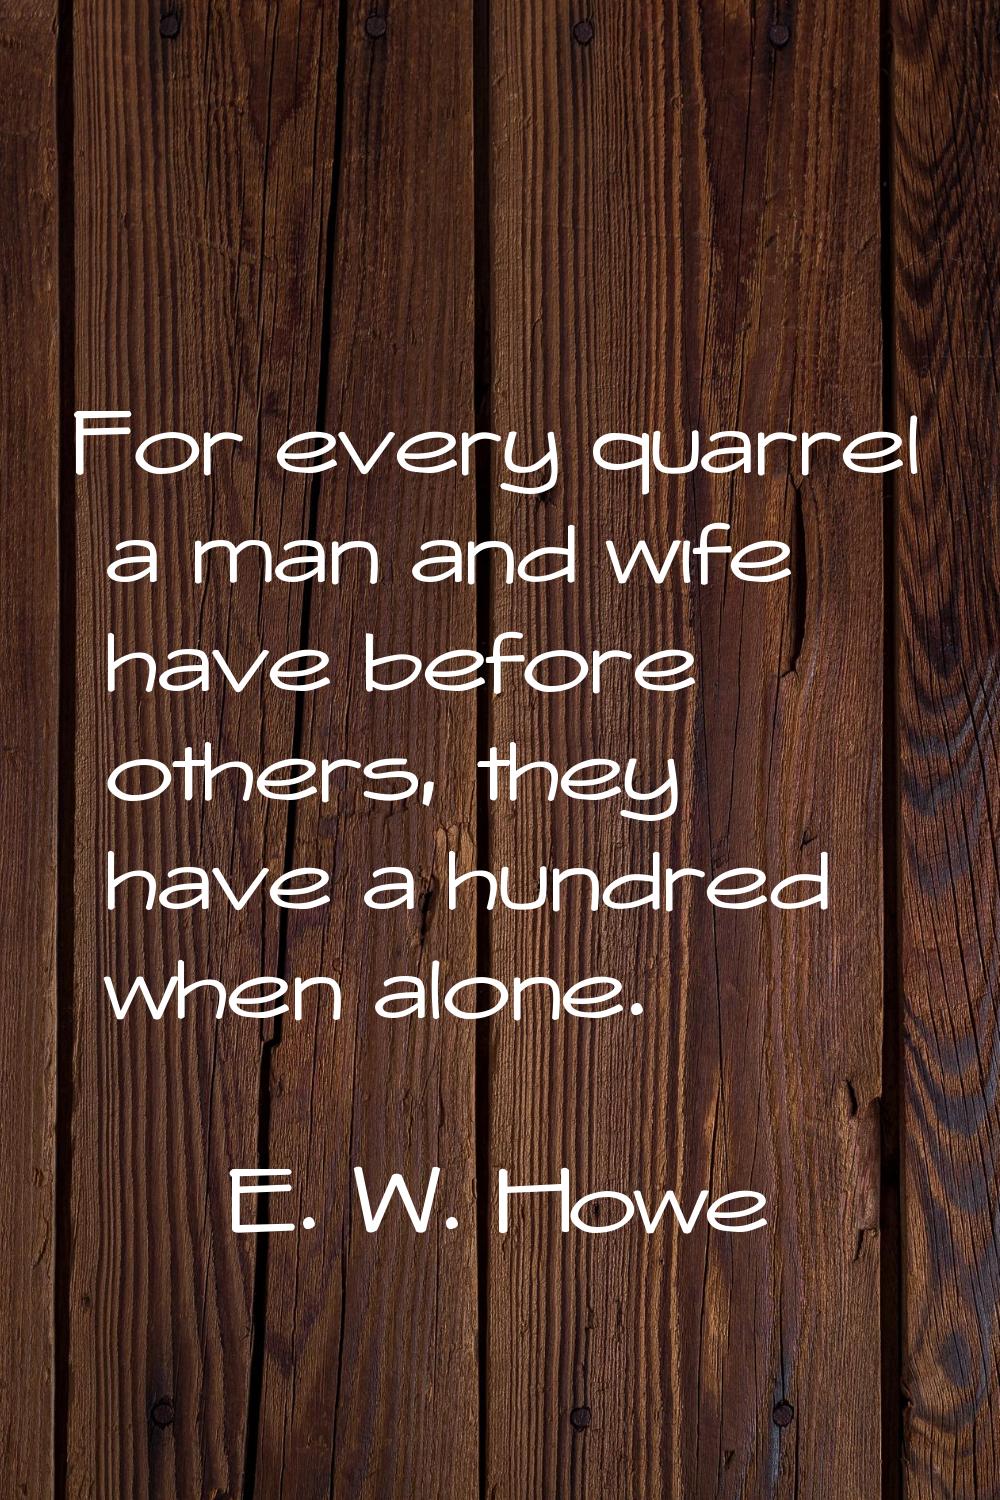 For every quarrel a man and wife have before others, they have a hundred when alone.